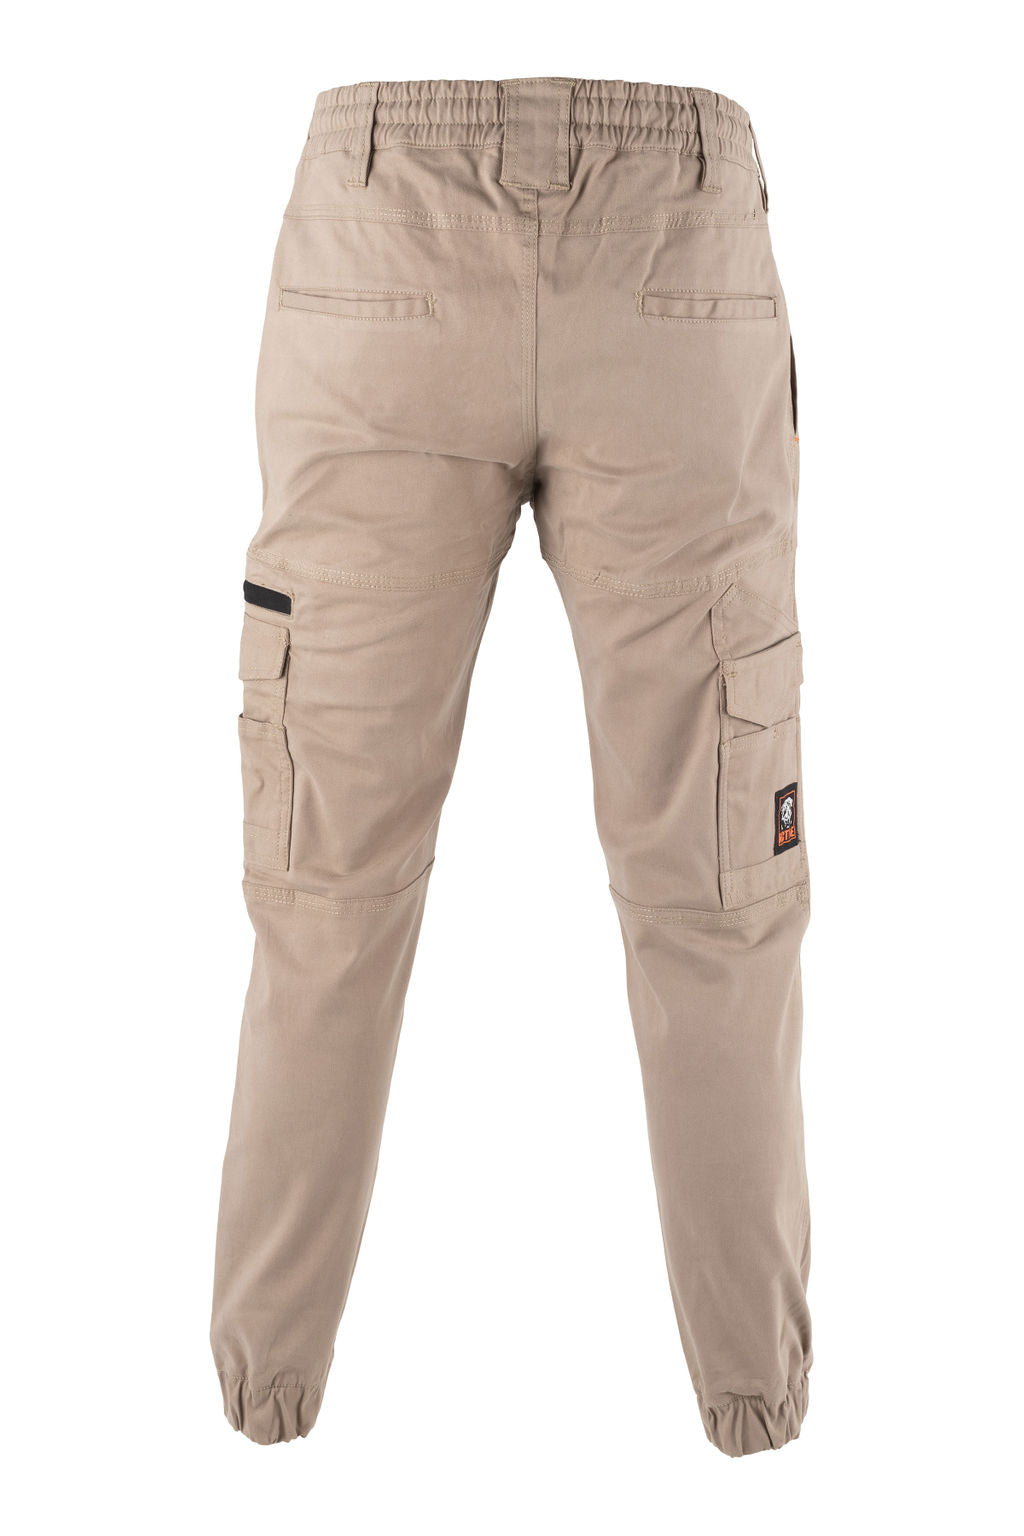 PANTS MENS - ON THE GO SAFETY & WORKWEAR